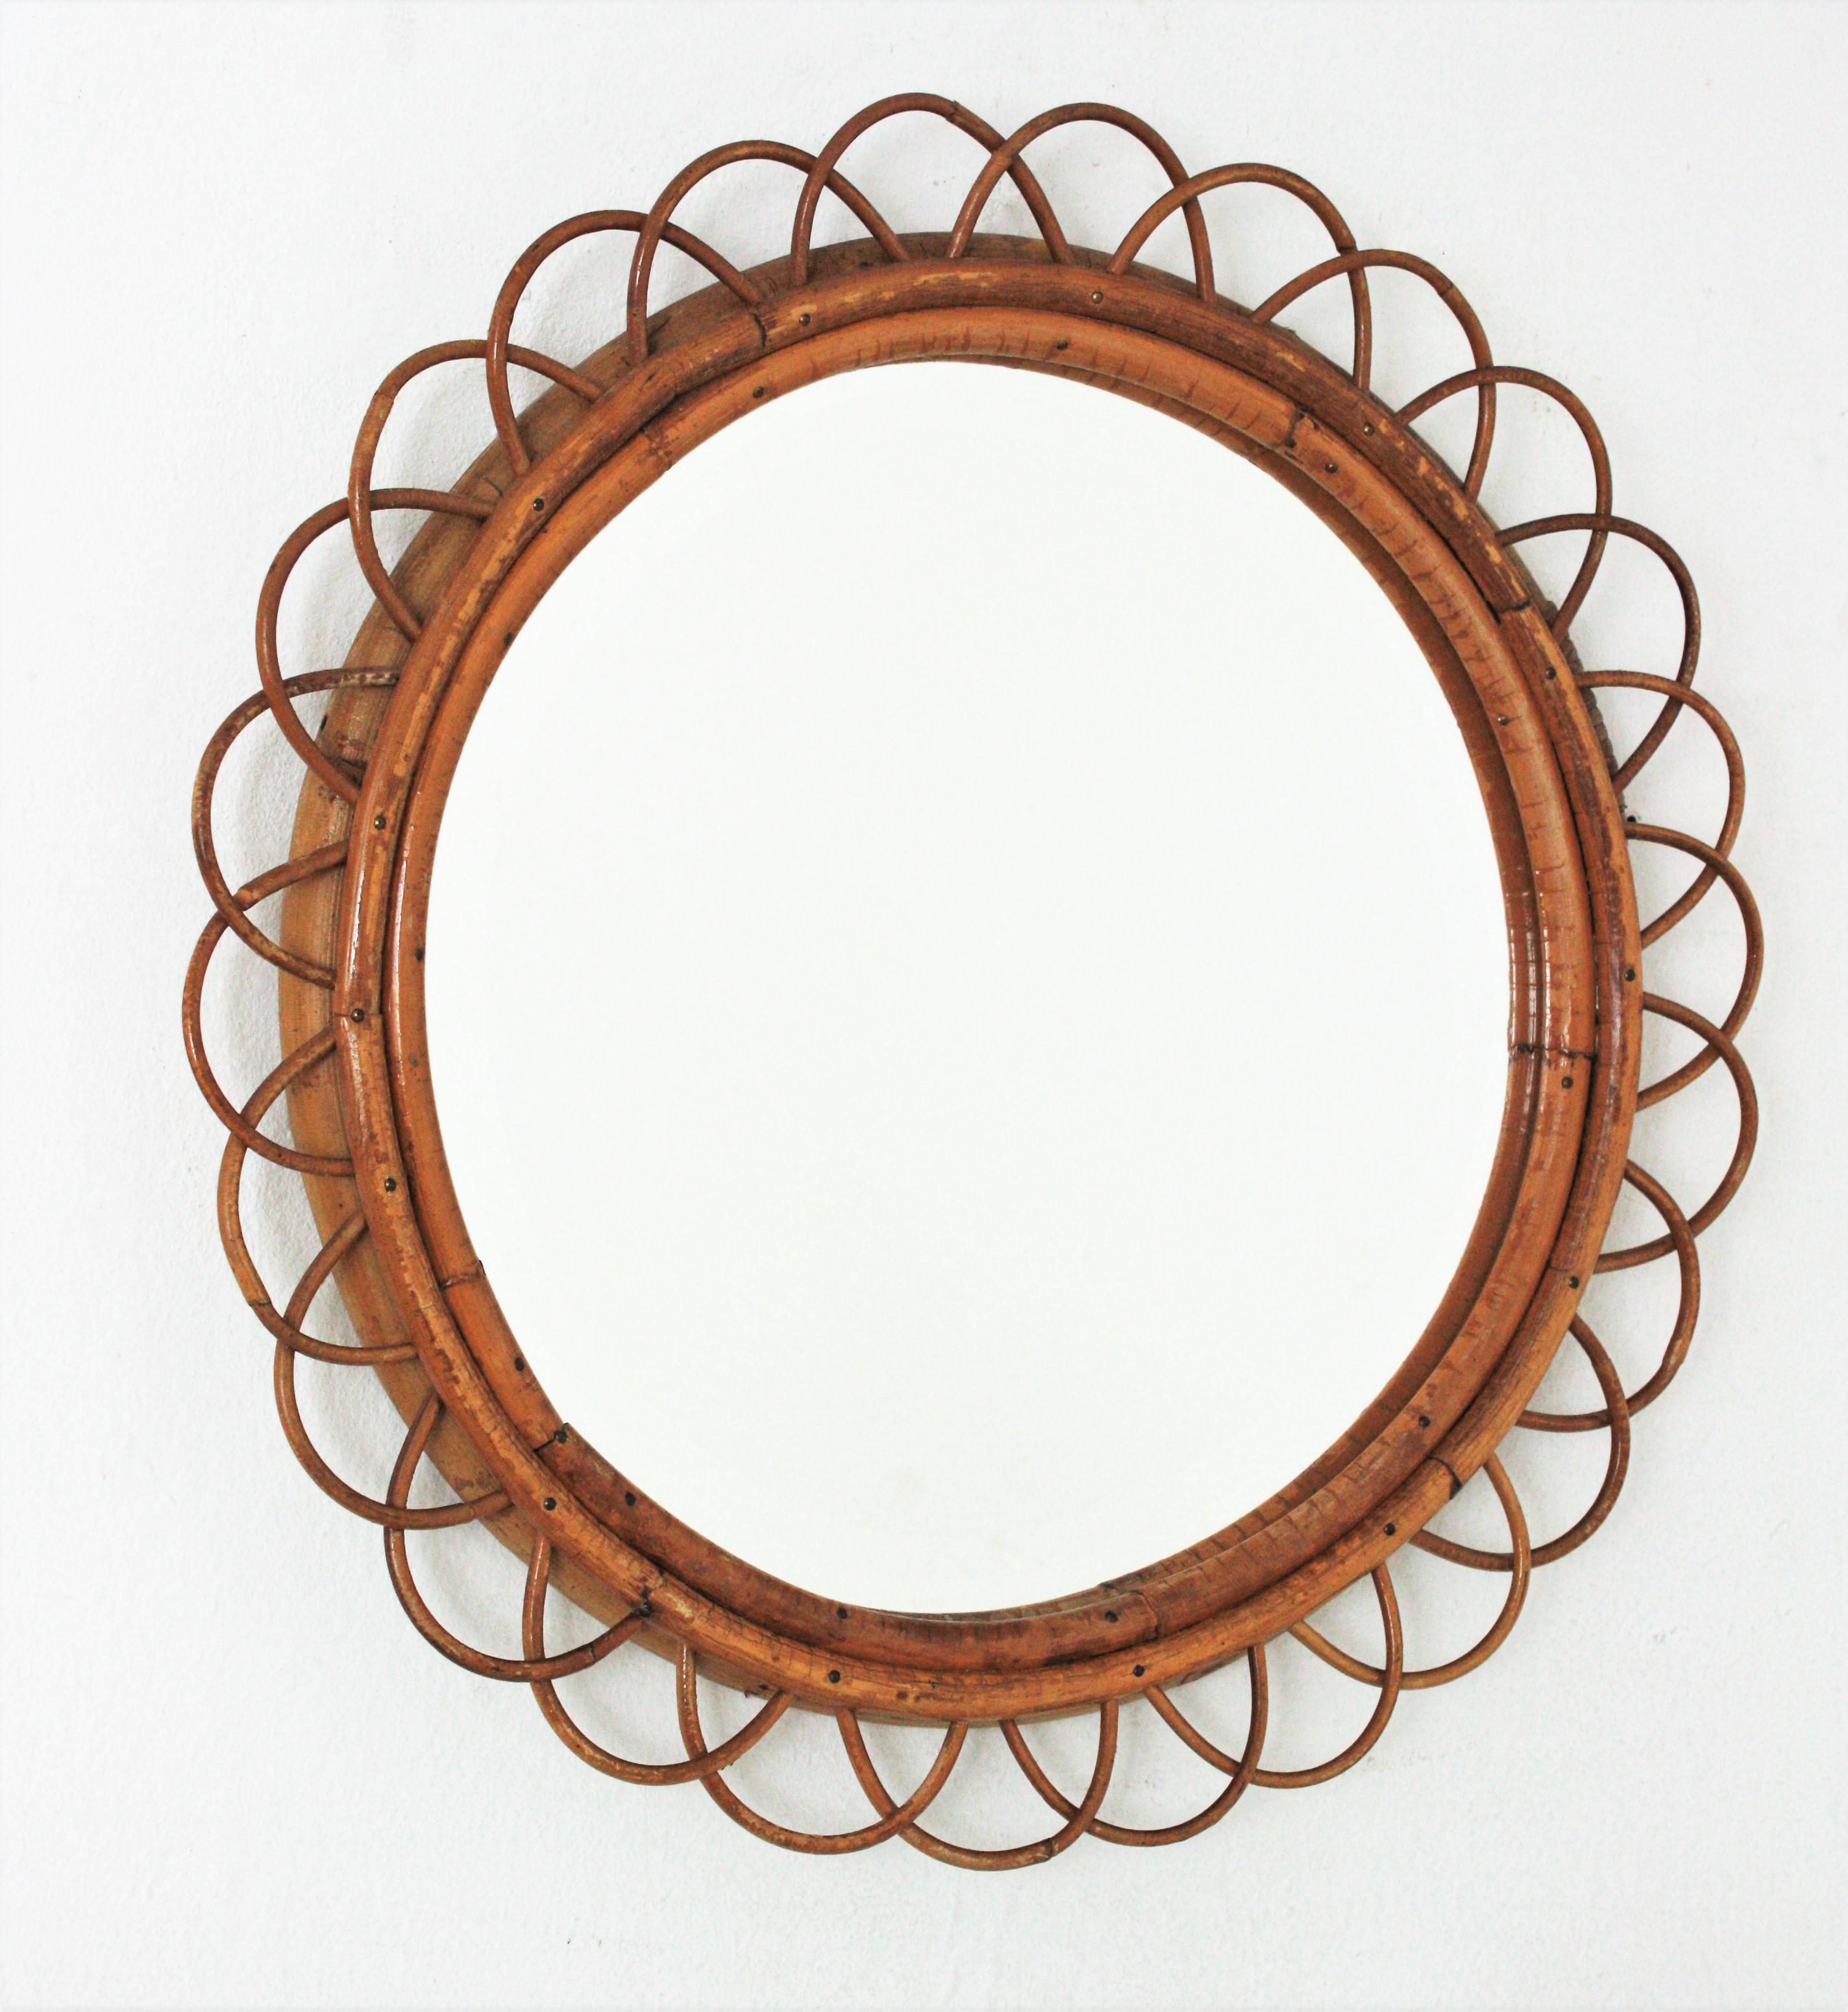 Round flower mirror, rattan, bamboo. Spain, 1960s
Eye-catching flower shaped bamboo and rattan mirror. 
Beautiful placed alone or as a part of a wall decoration with other cane mirrors. Interesting choice for a country house, beach house